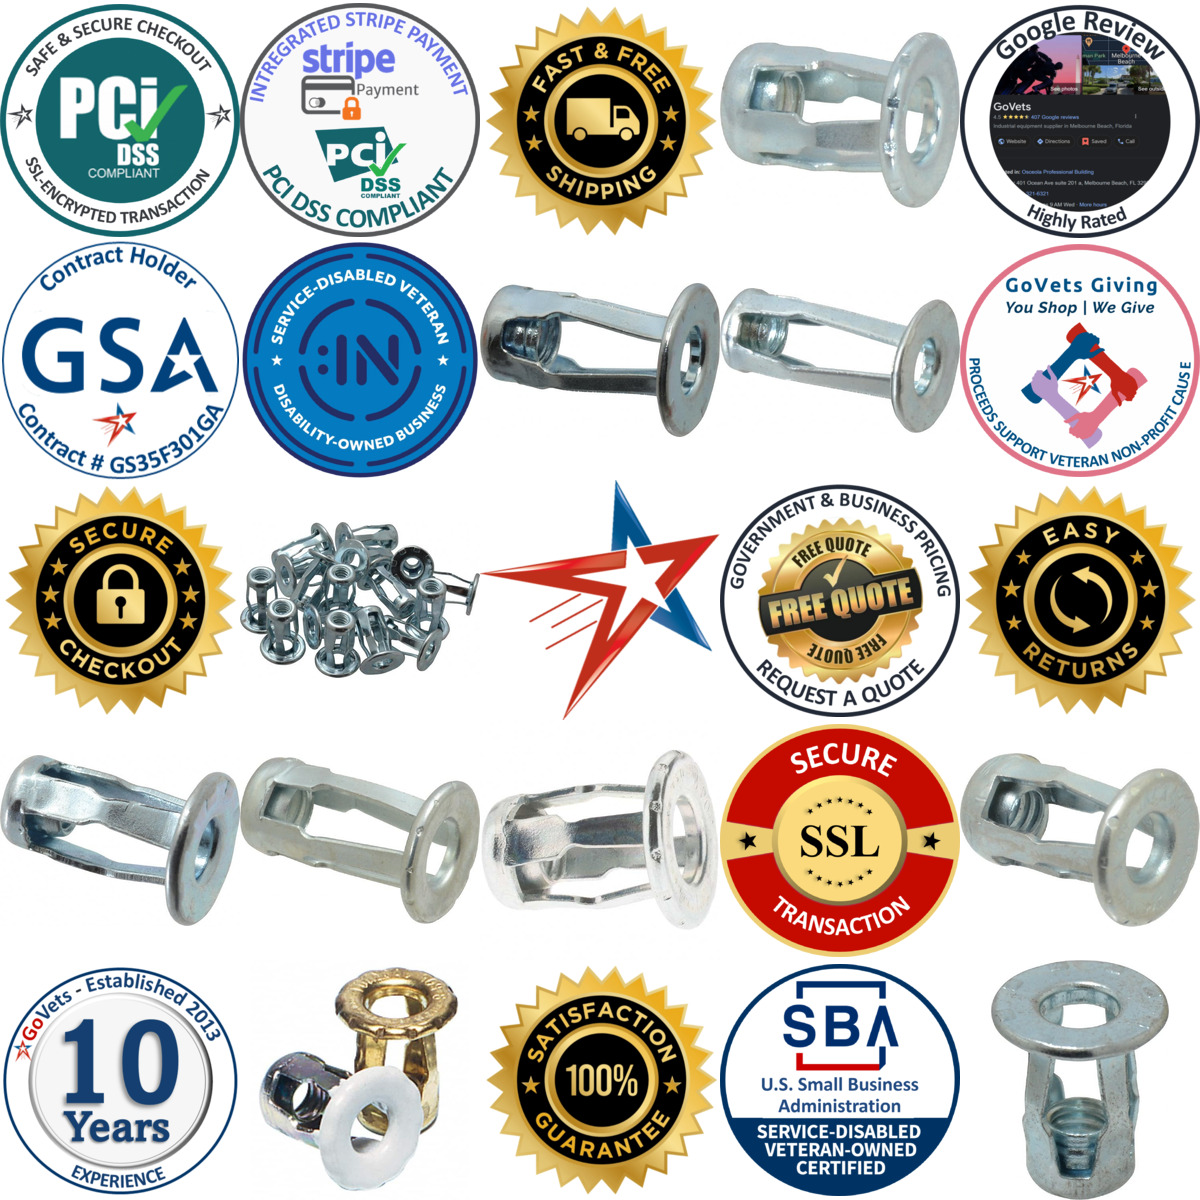 A selection of Screwdriver Installed Rivet Nuts products on GoVets